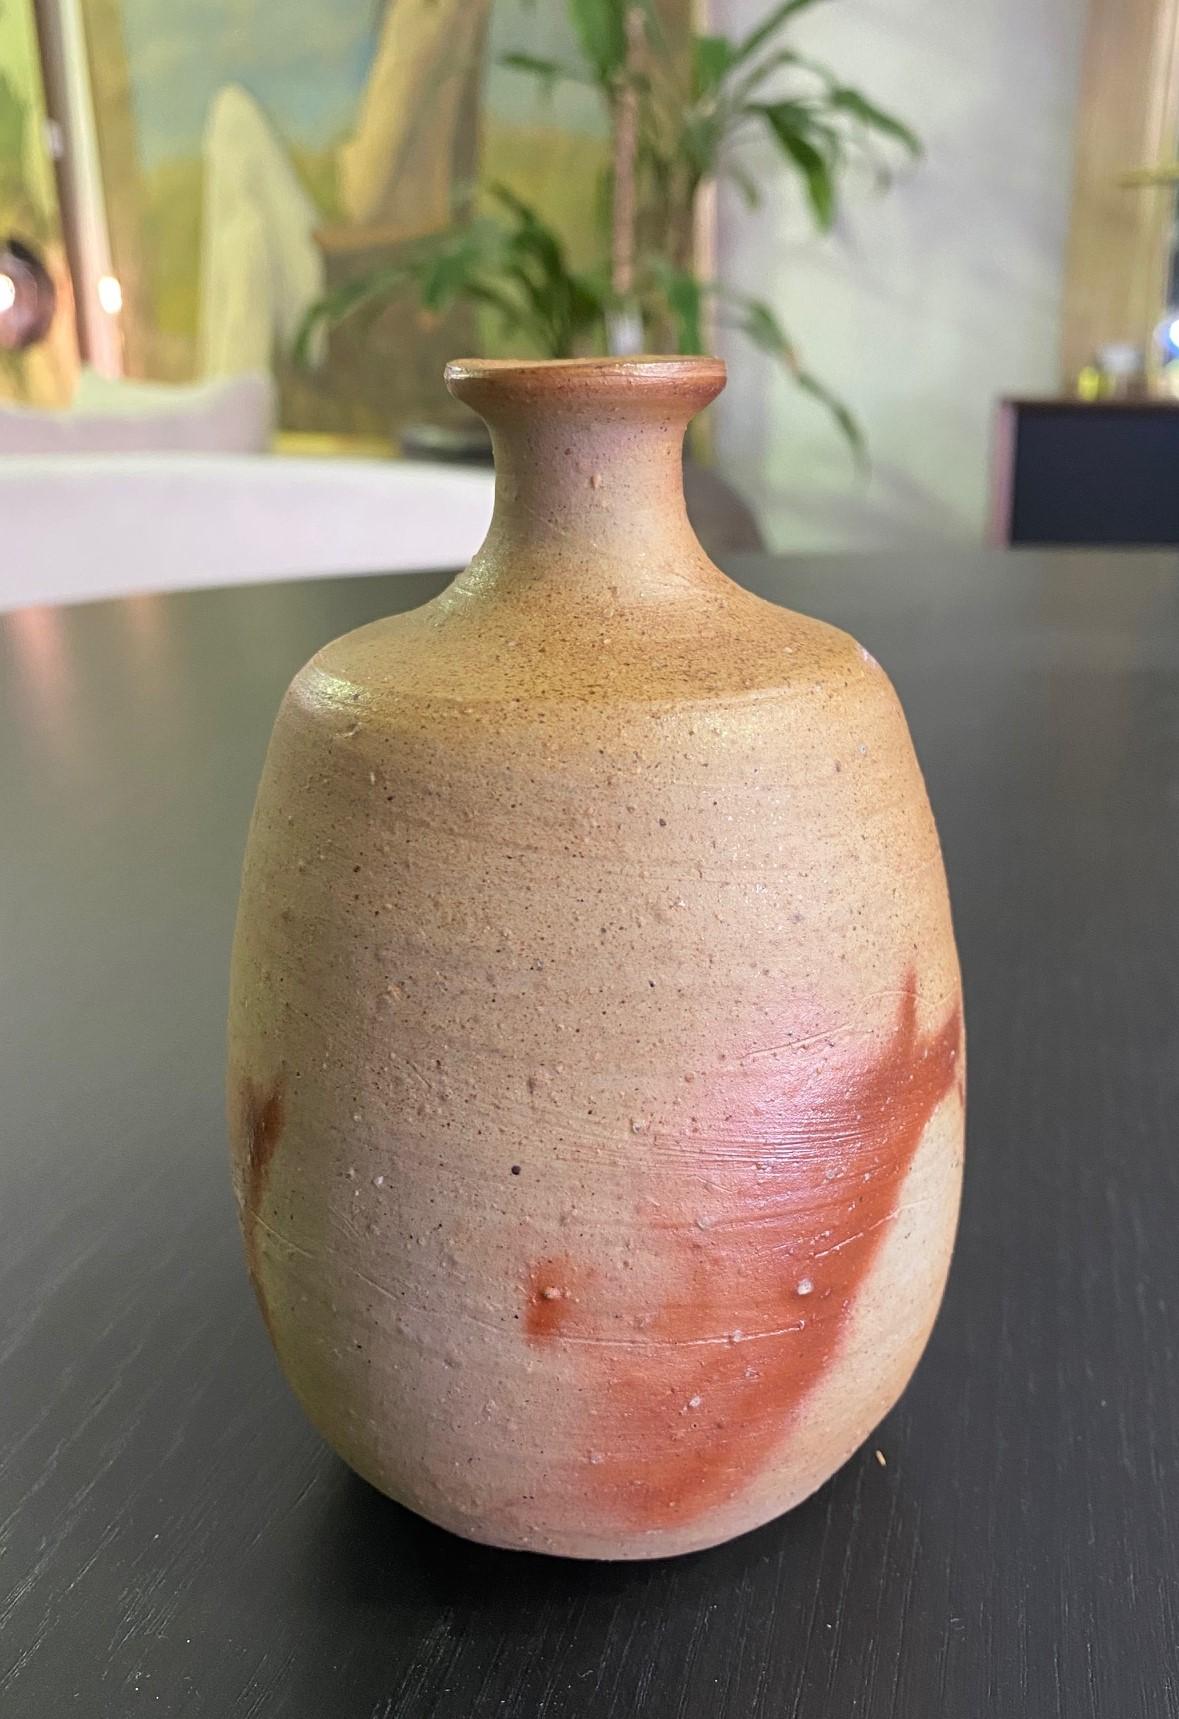 A wonderfully made pottery bottle/vase by famed Japanese Bizen ware master artist Jun Isezaki who was named a Japanese Living National Treasure. 

Beautiful, exquisite form, and glowing Bizen rich color. 

The work is signed by Isezaki on the